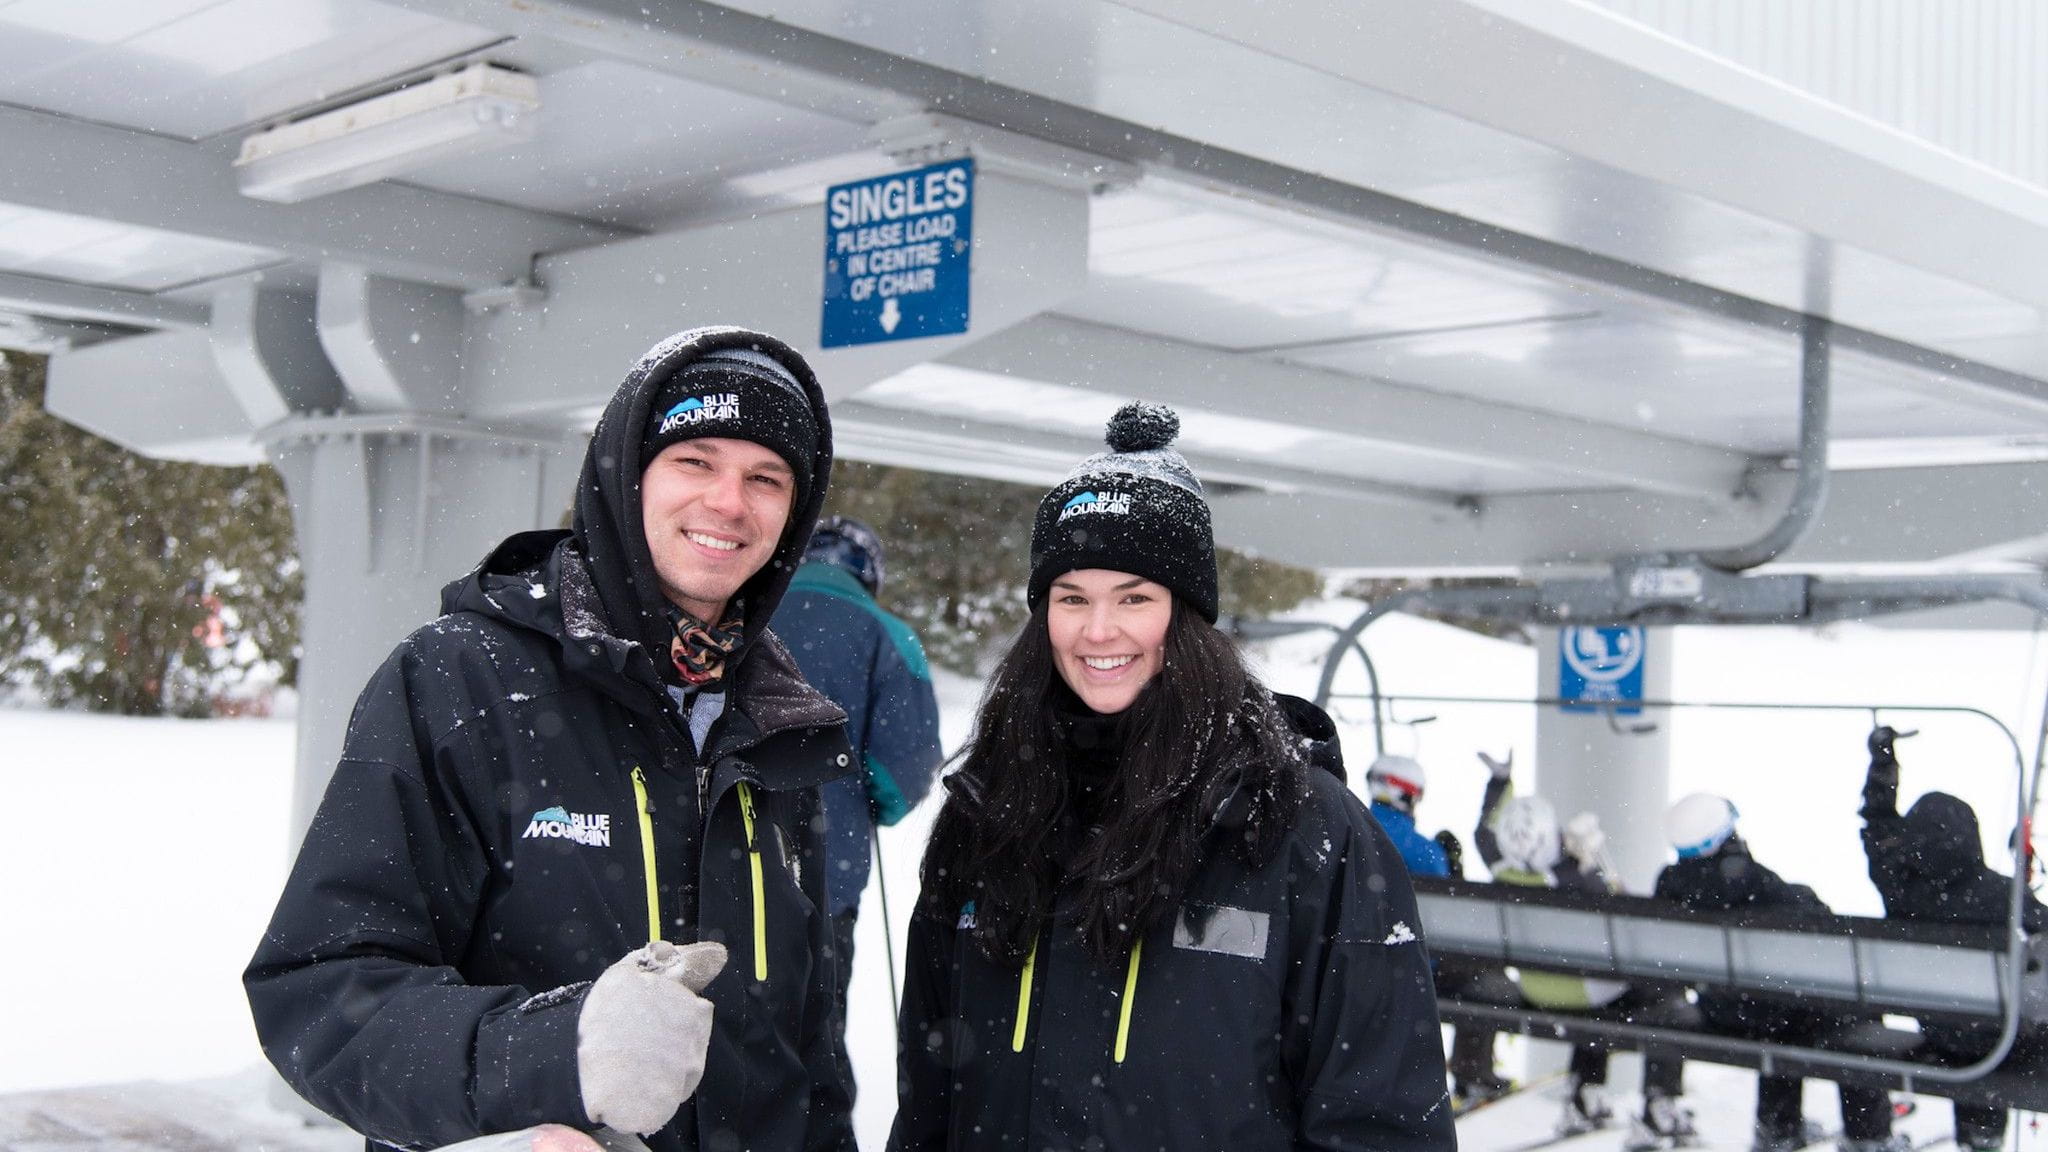 Two Blue Mountain Employees standing in front of lift with riders sitting on chair